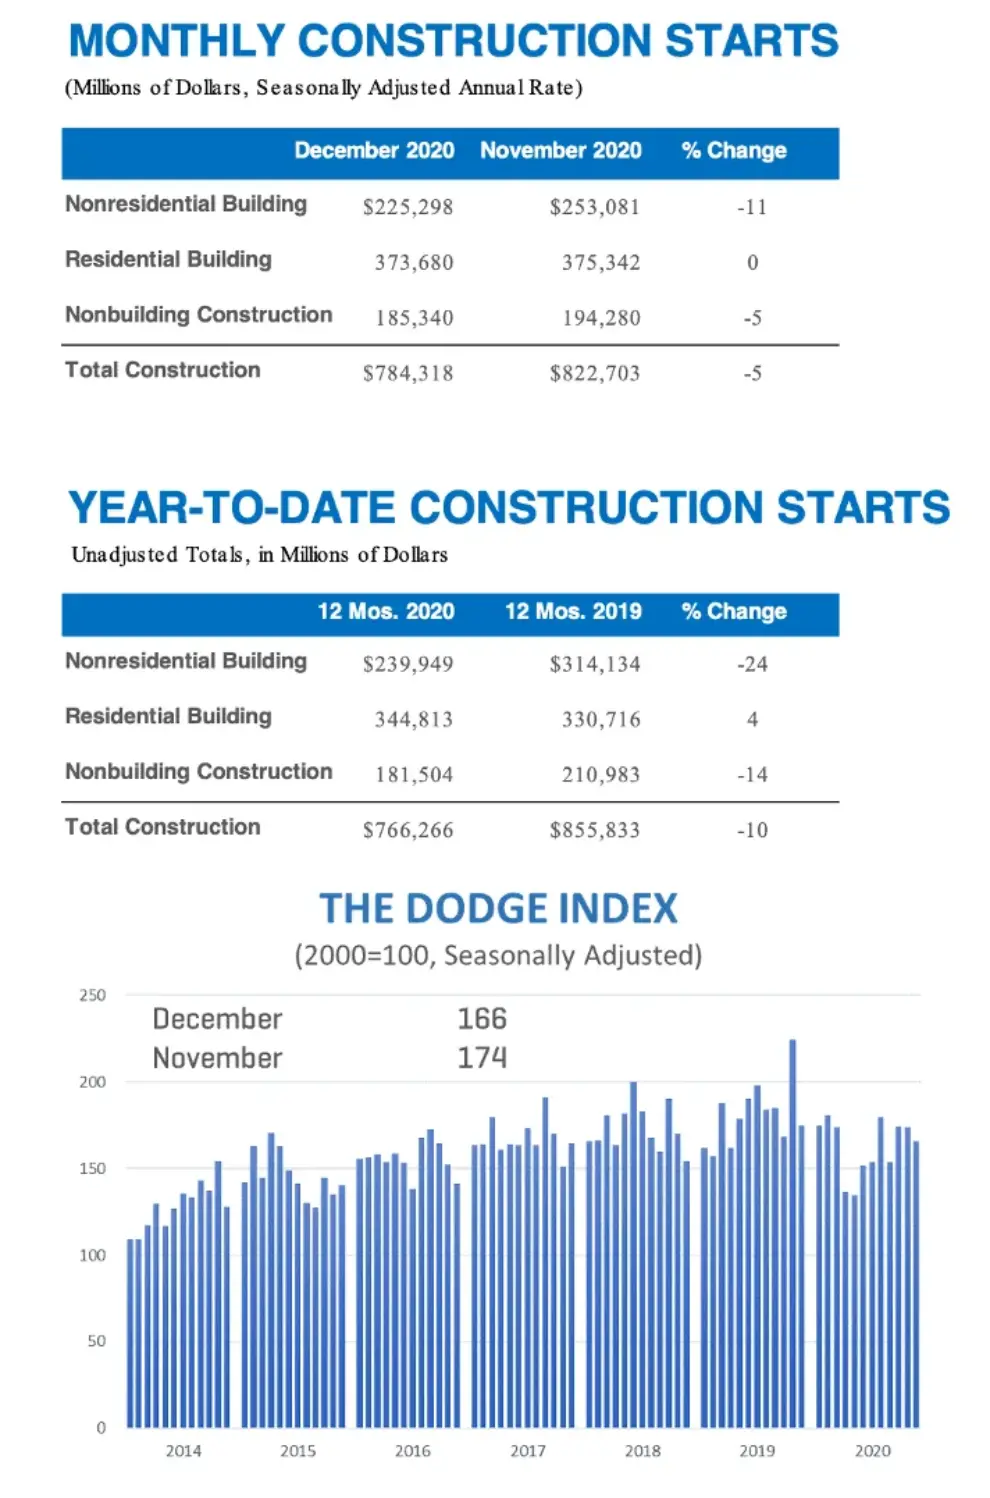 Construction Starts End 2020 on a Sour Note